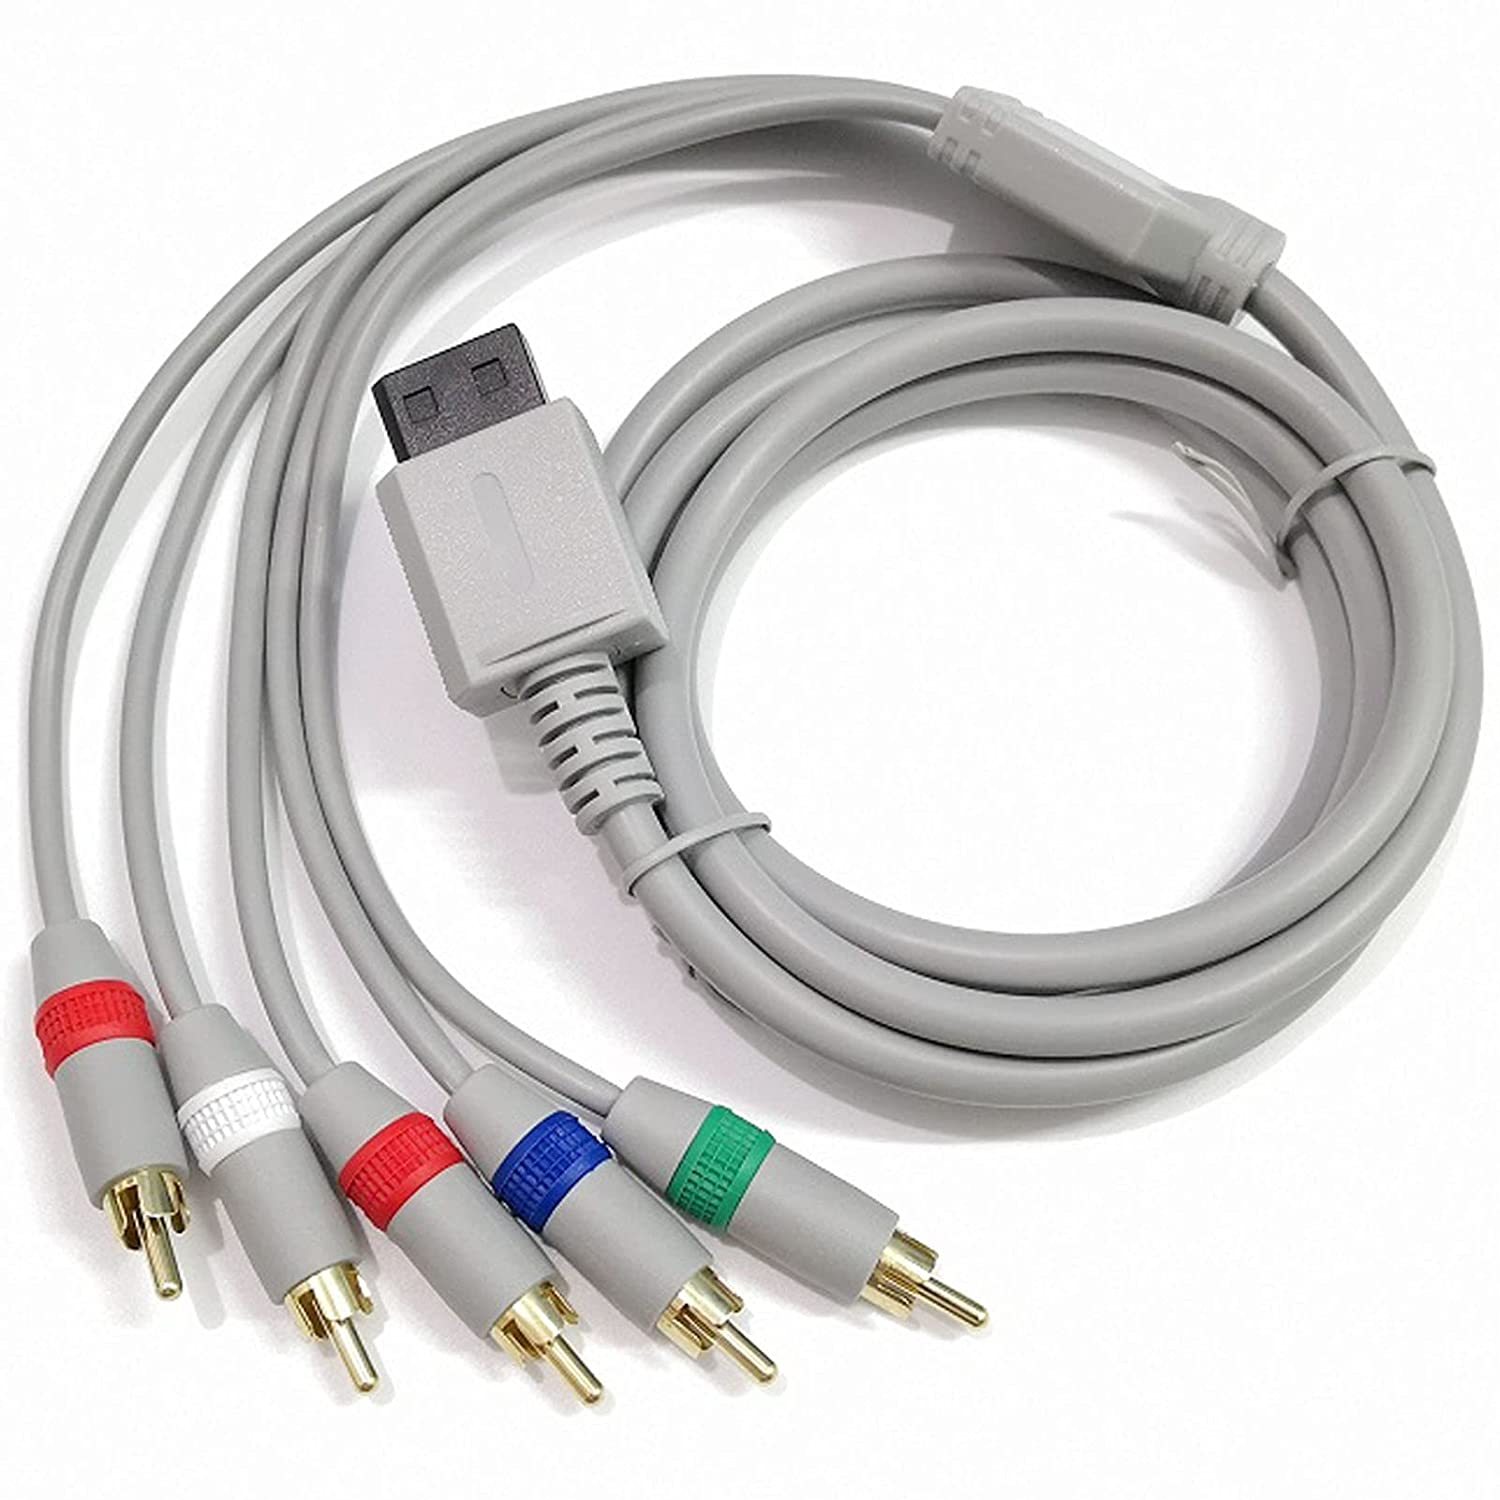 Primary image for 6Ft Av Component Cable For Wii/Wii U Rca Audio Video Hd Cord-1 Pack